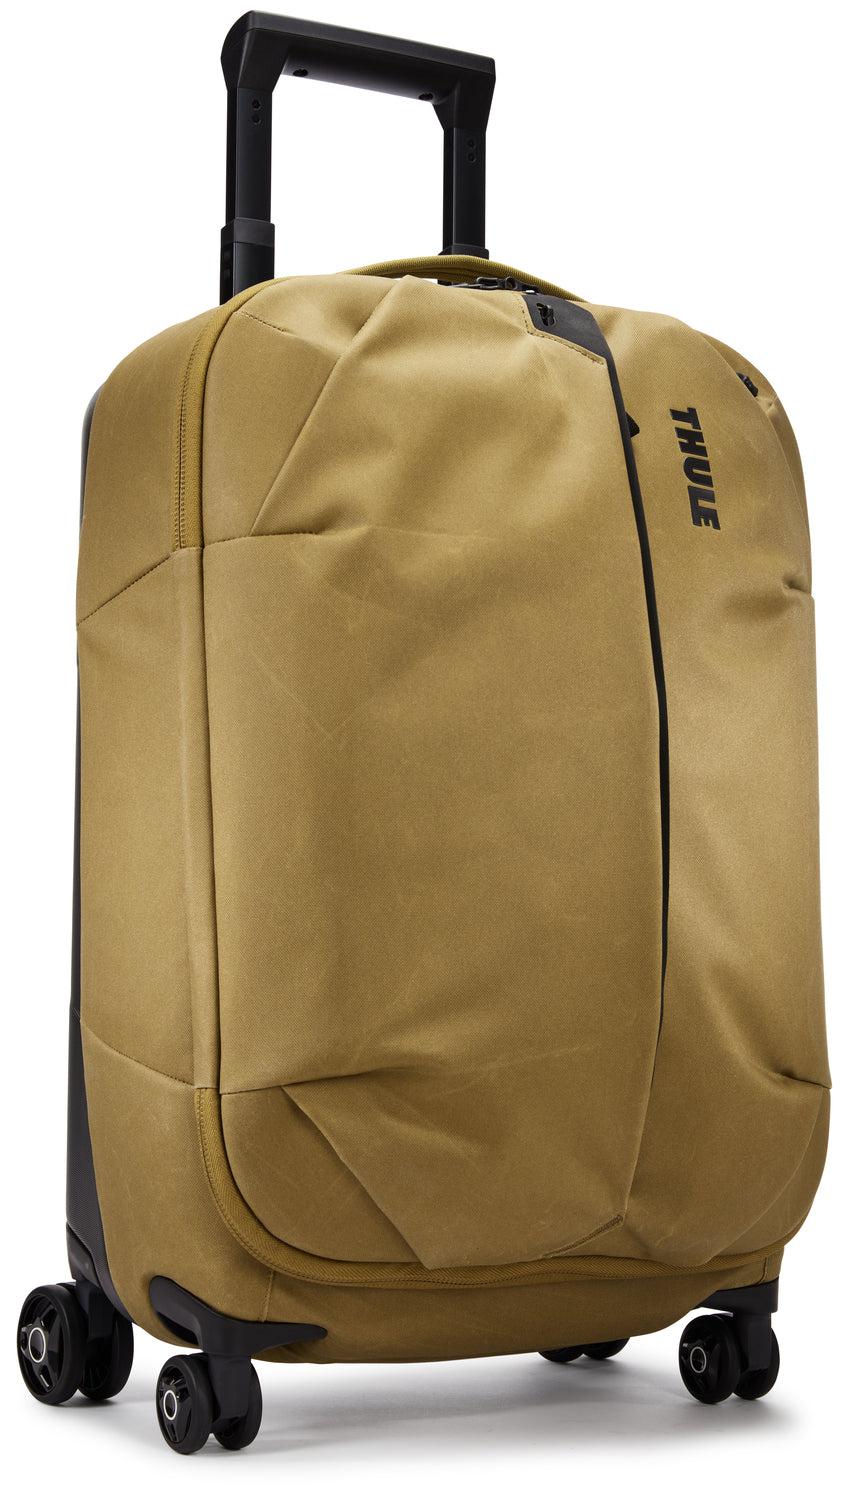 Thule Luggage Aion Carry On Spinner – Luggage Pros